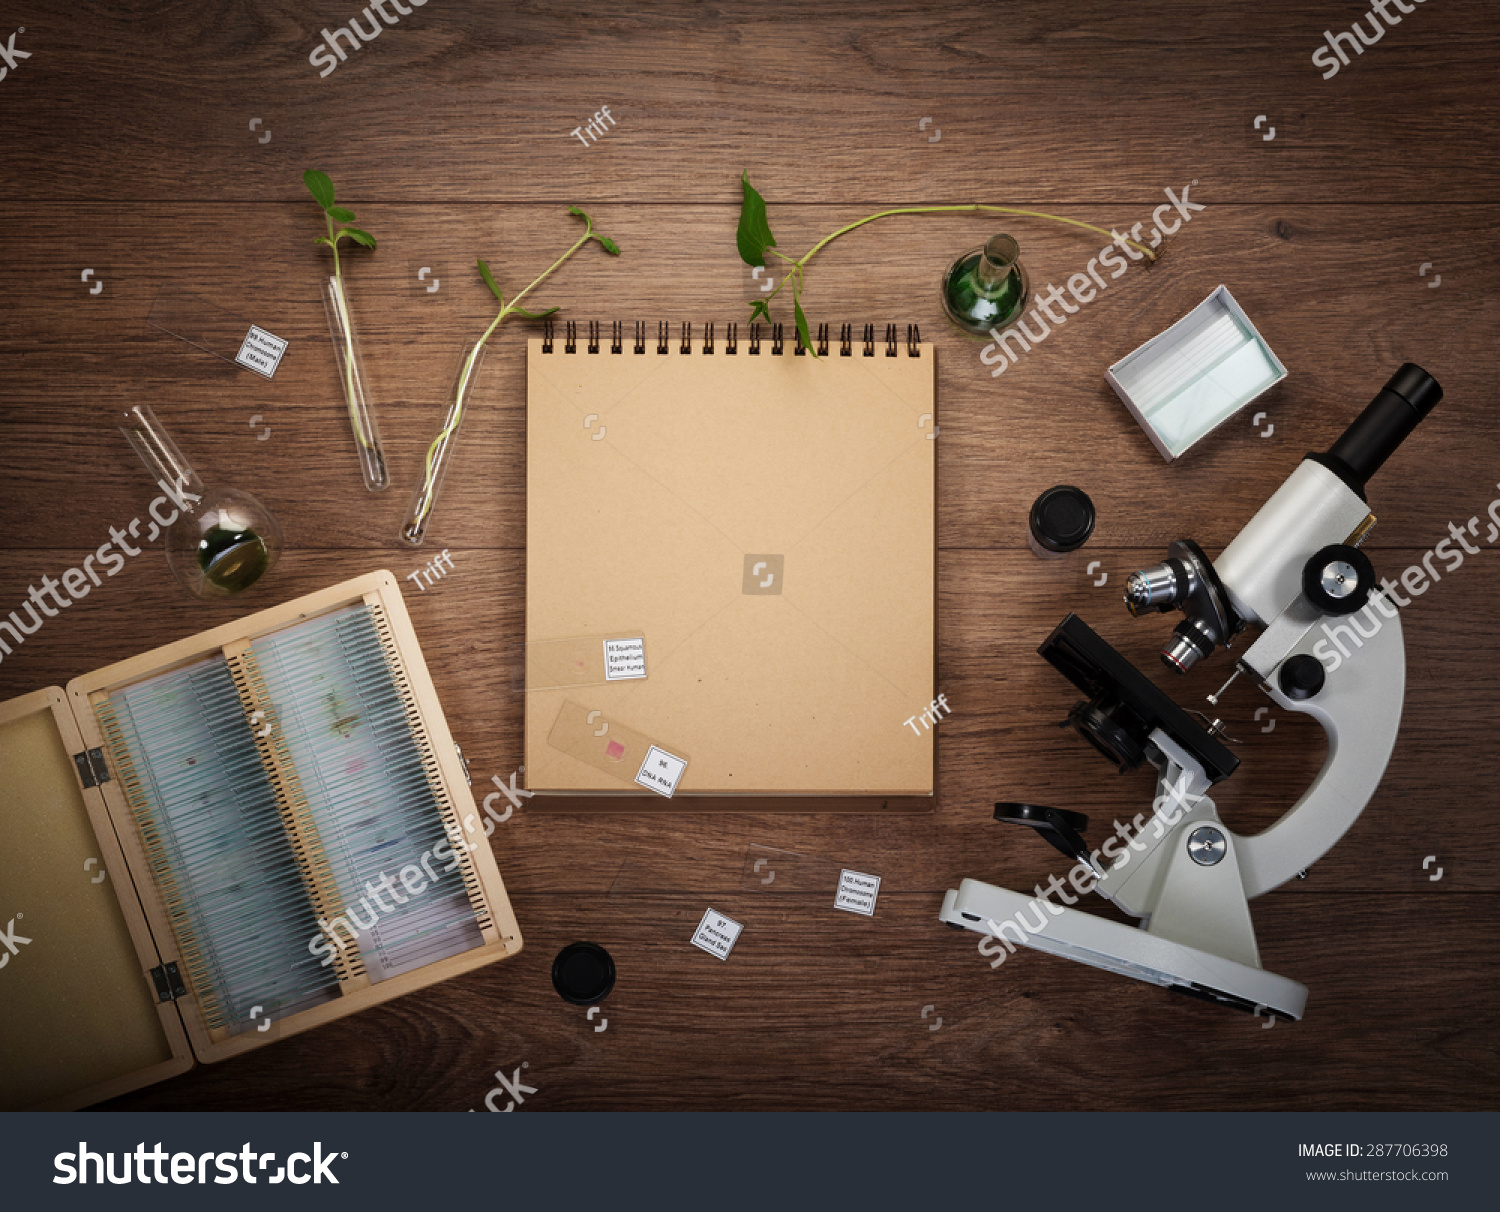 Scientific Accessories On Table Education Science Stock Photo